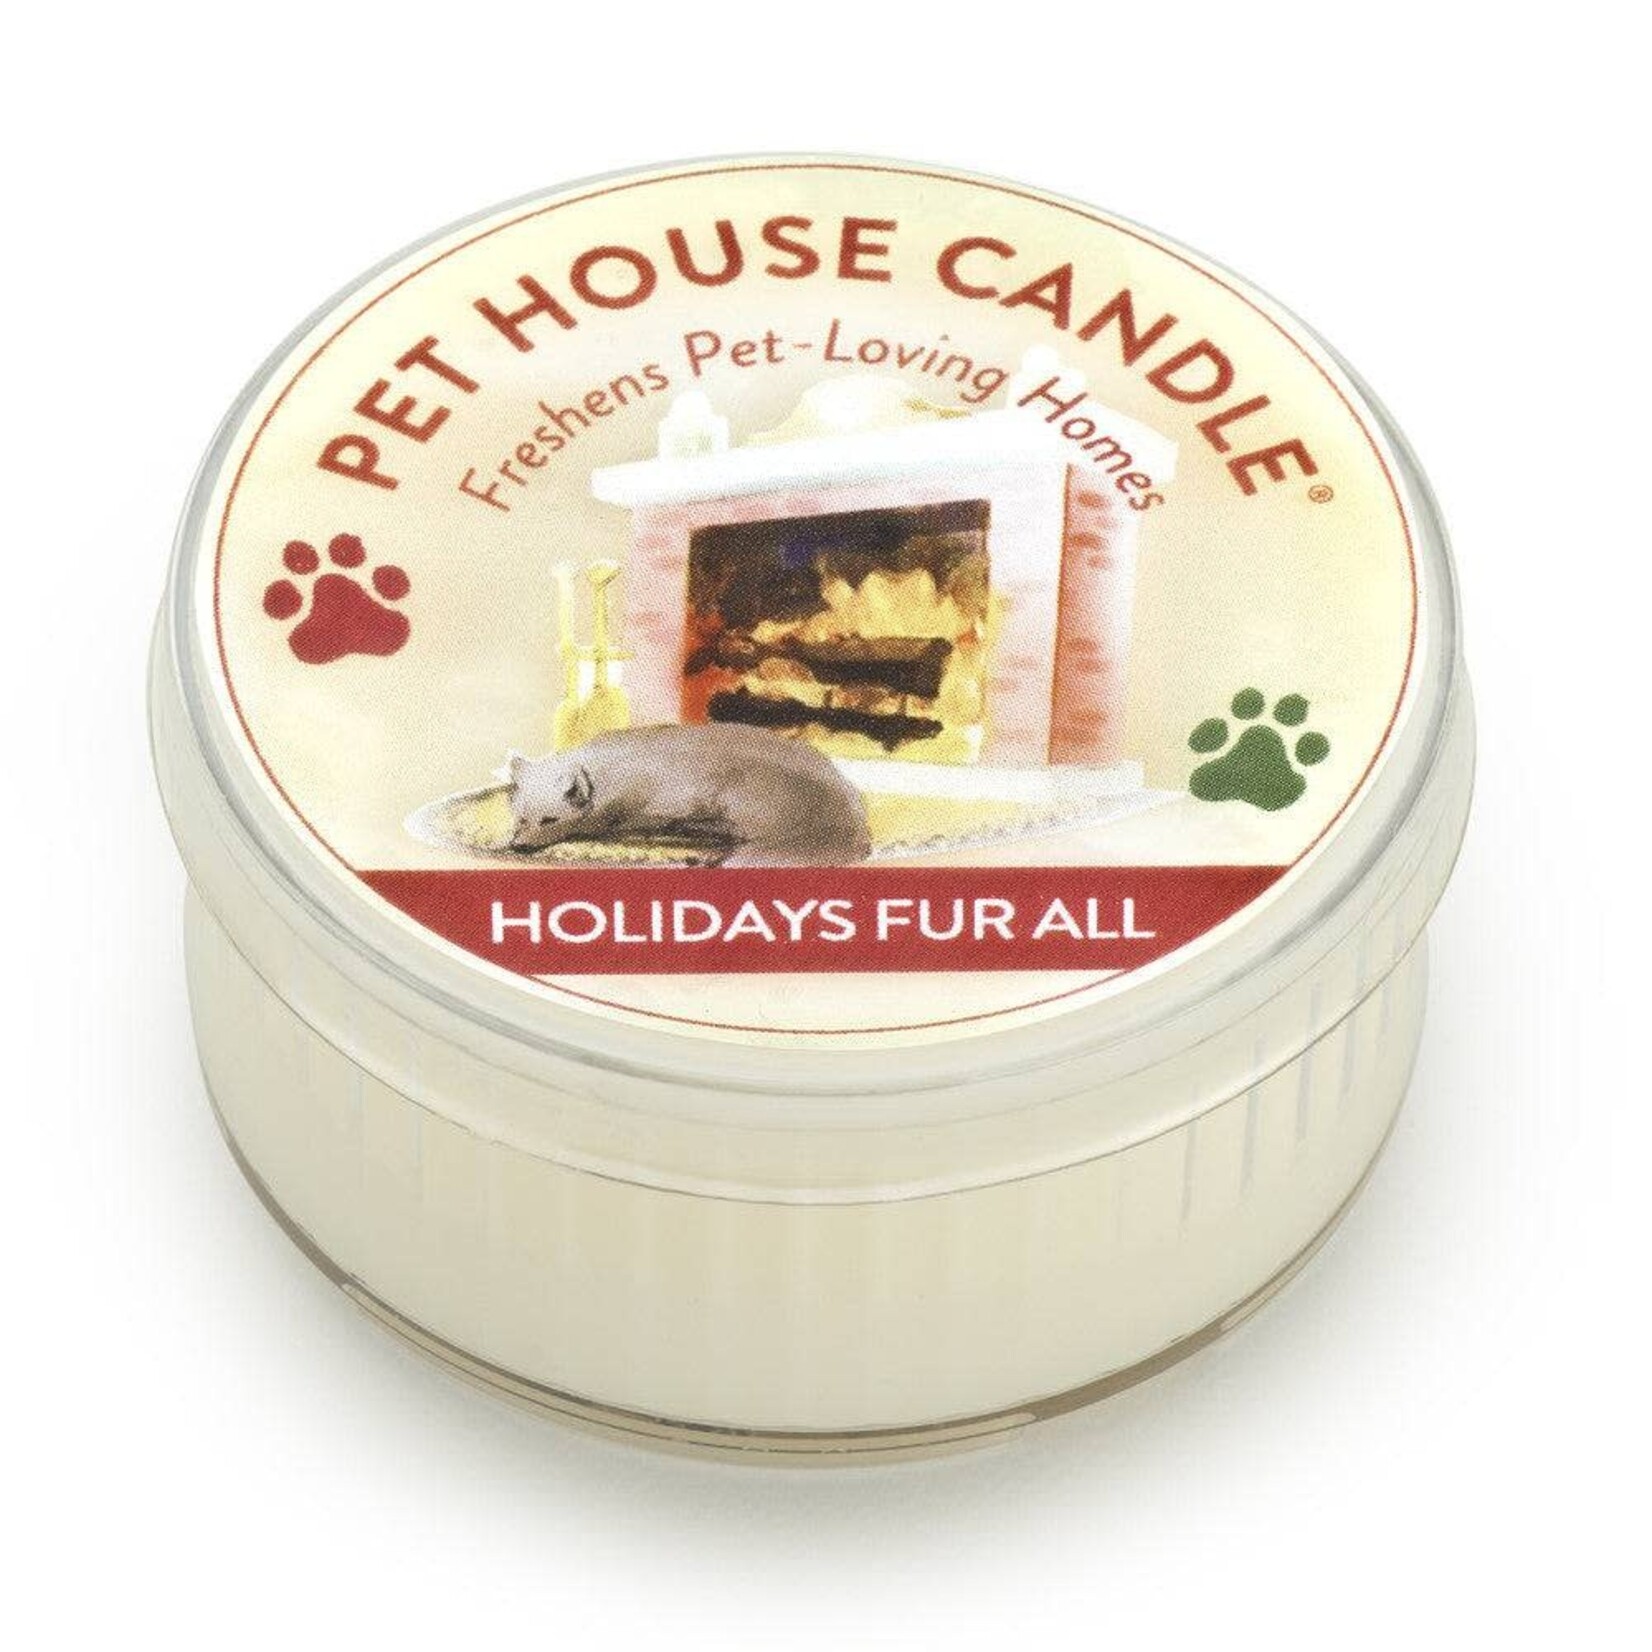 PET HOUSE CANDLE Pet House Mini Candles Holidays Fur All